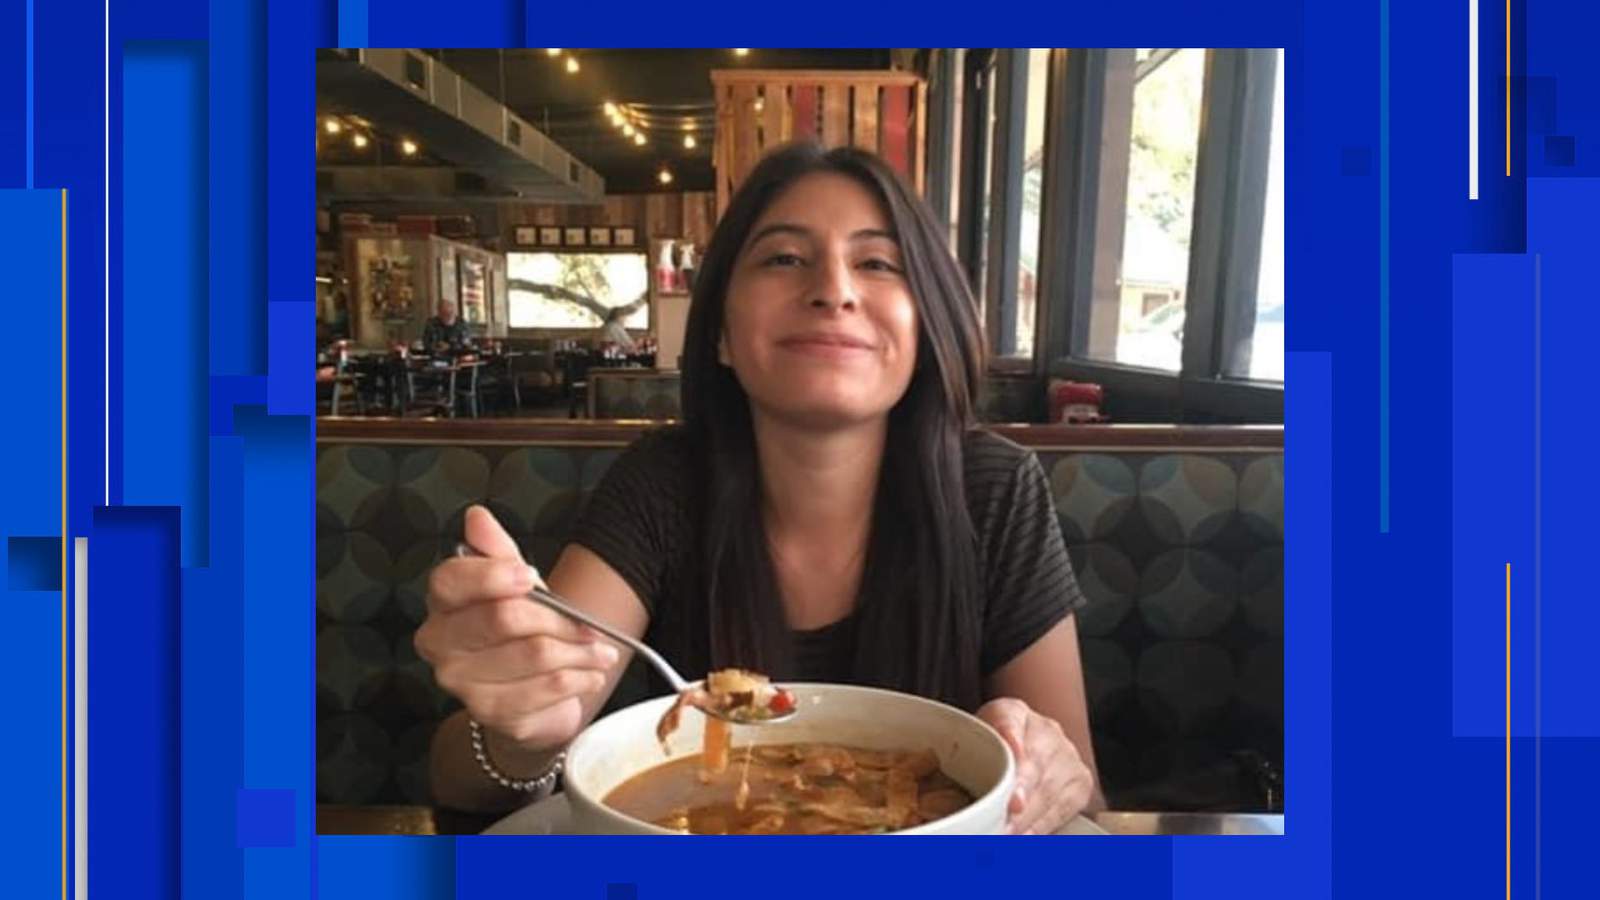 Pregnant 23-year-old woman from Wimberley missing